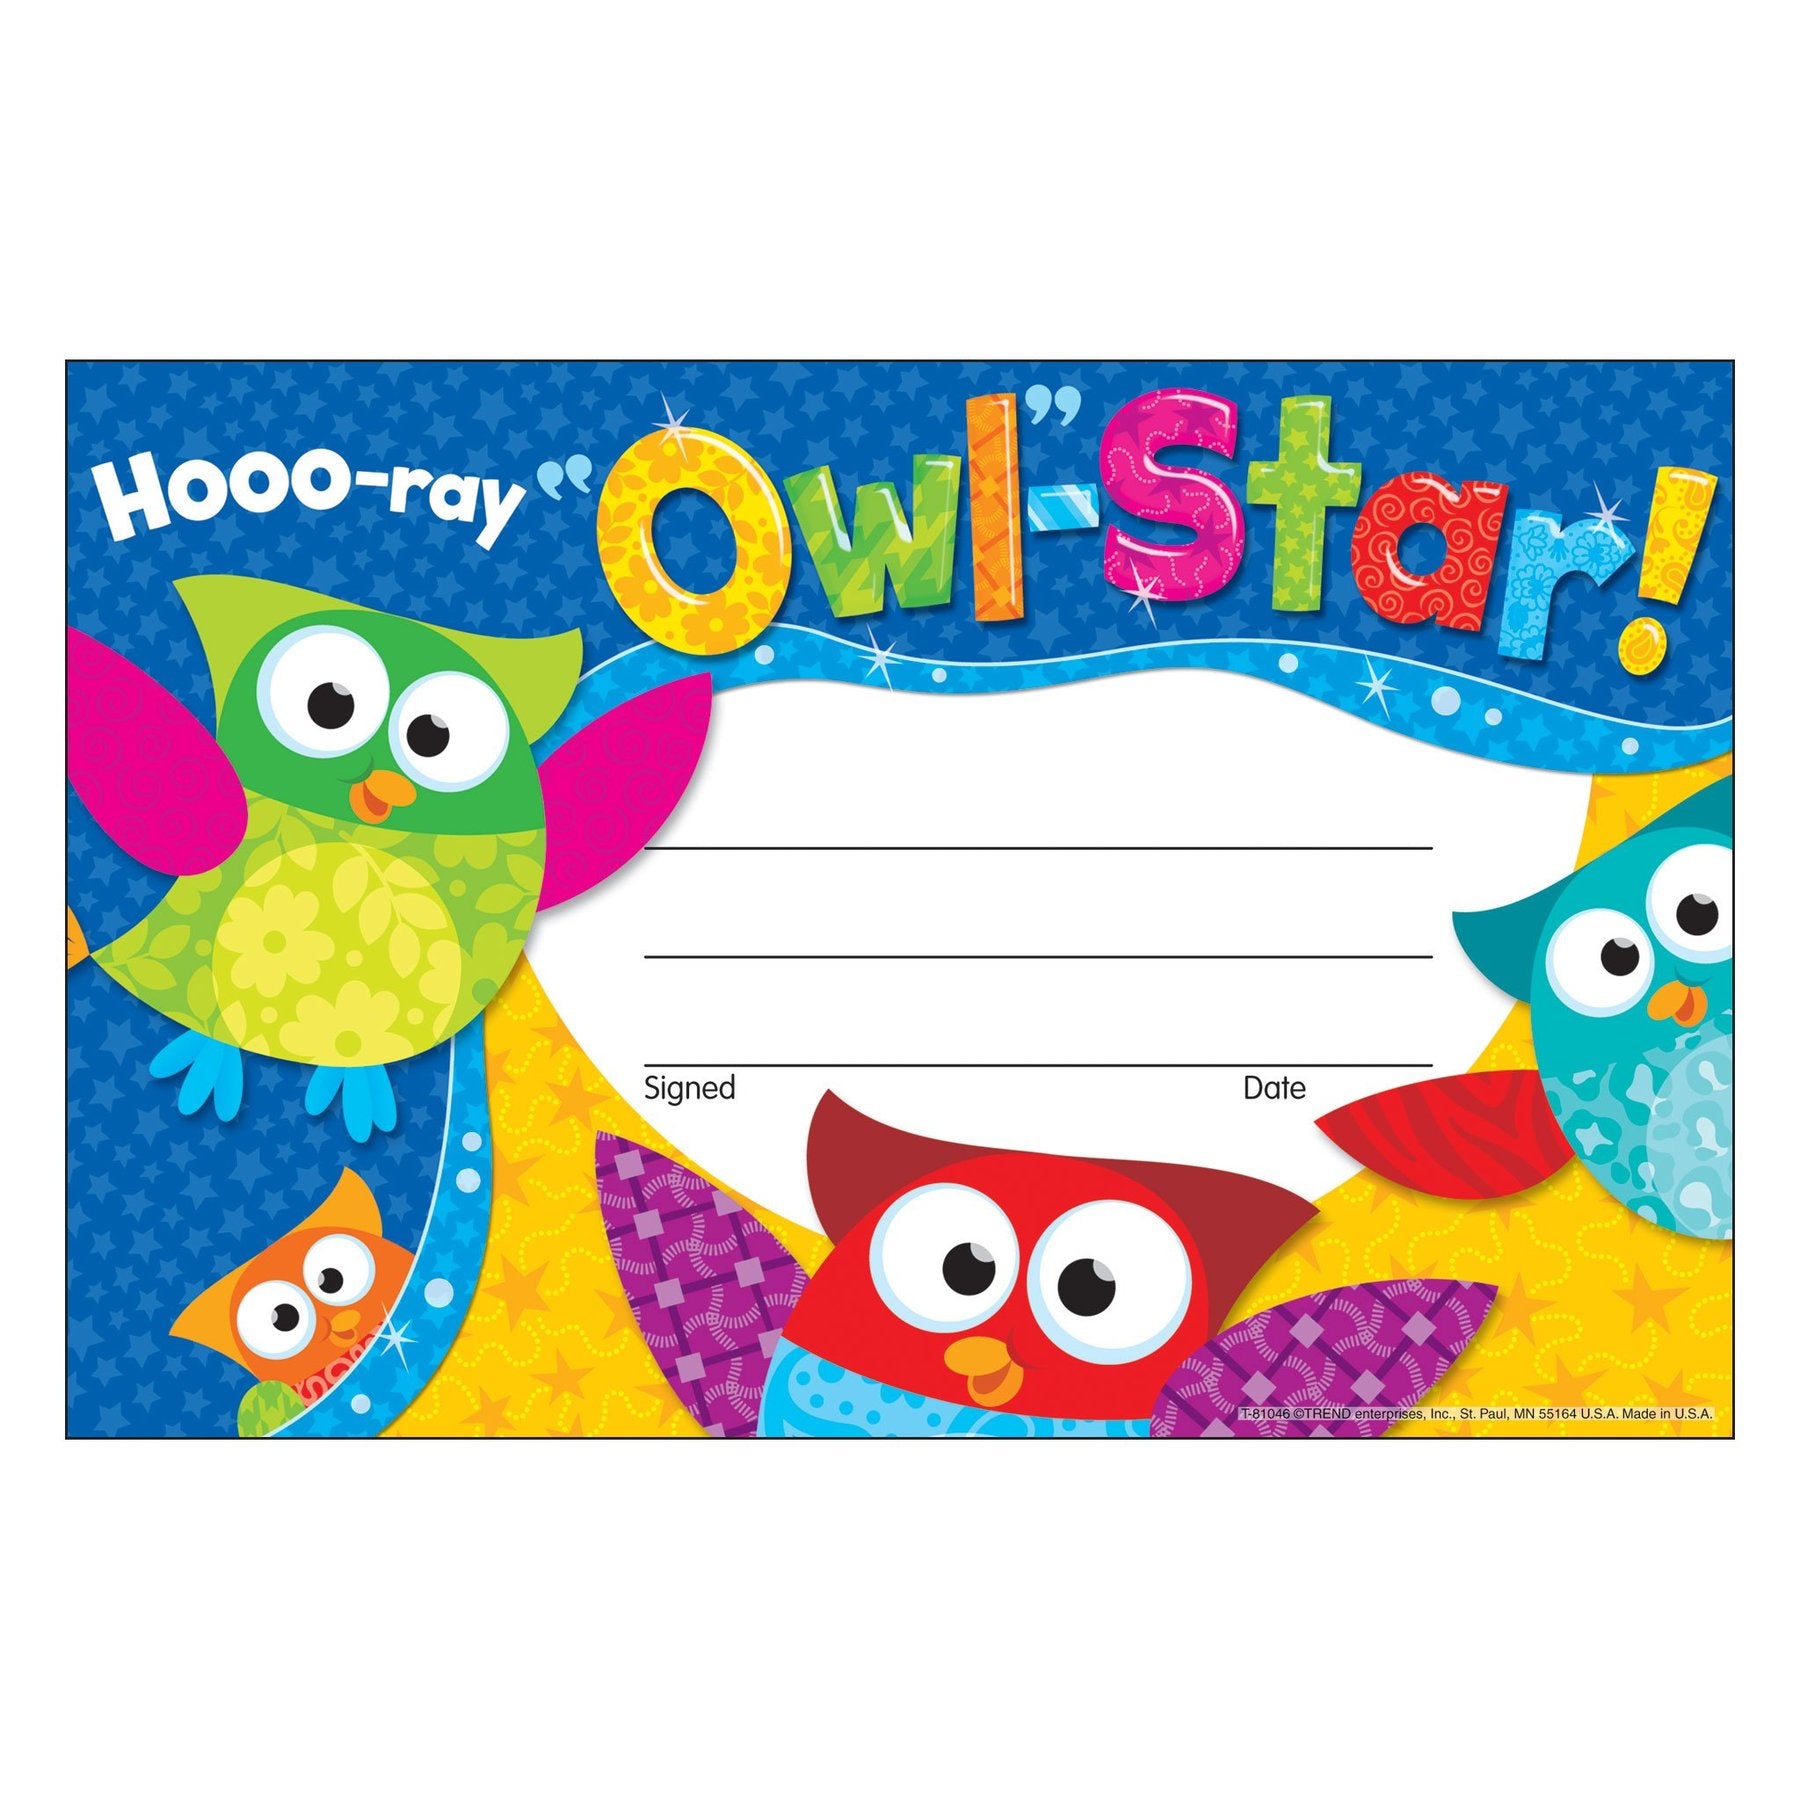 Hooo-ray Owl-Star! Recognition Awards